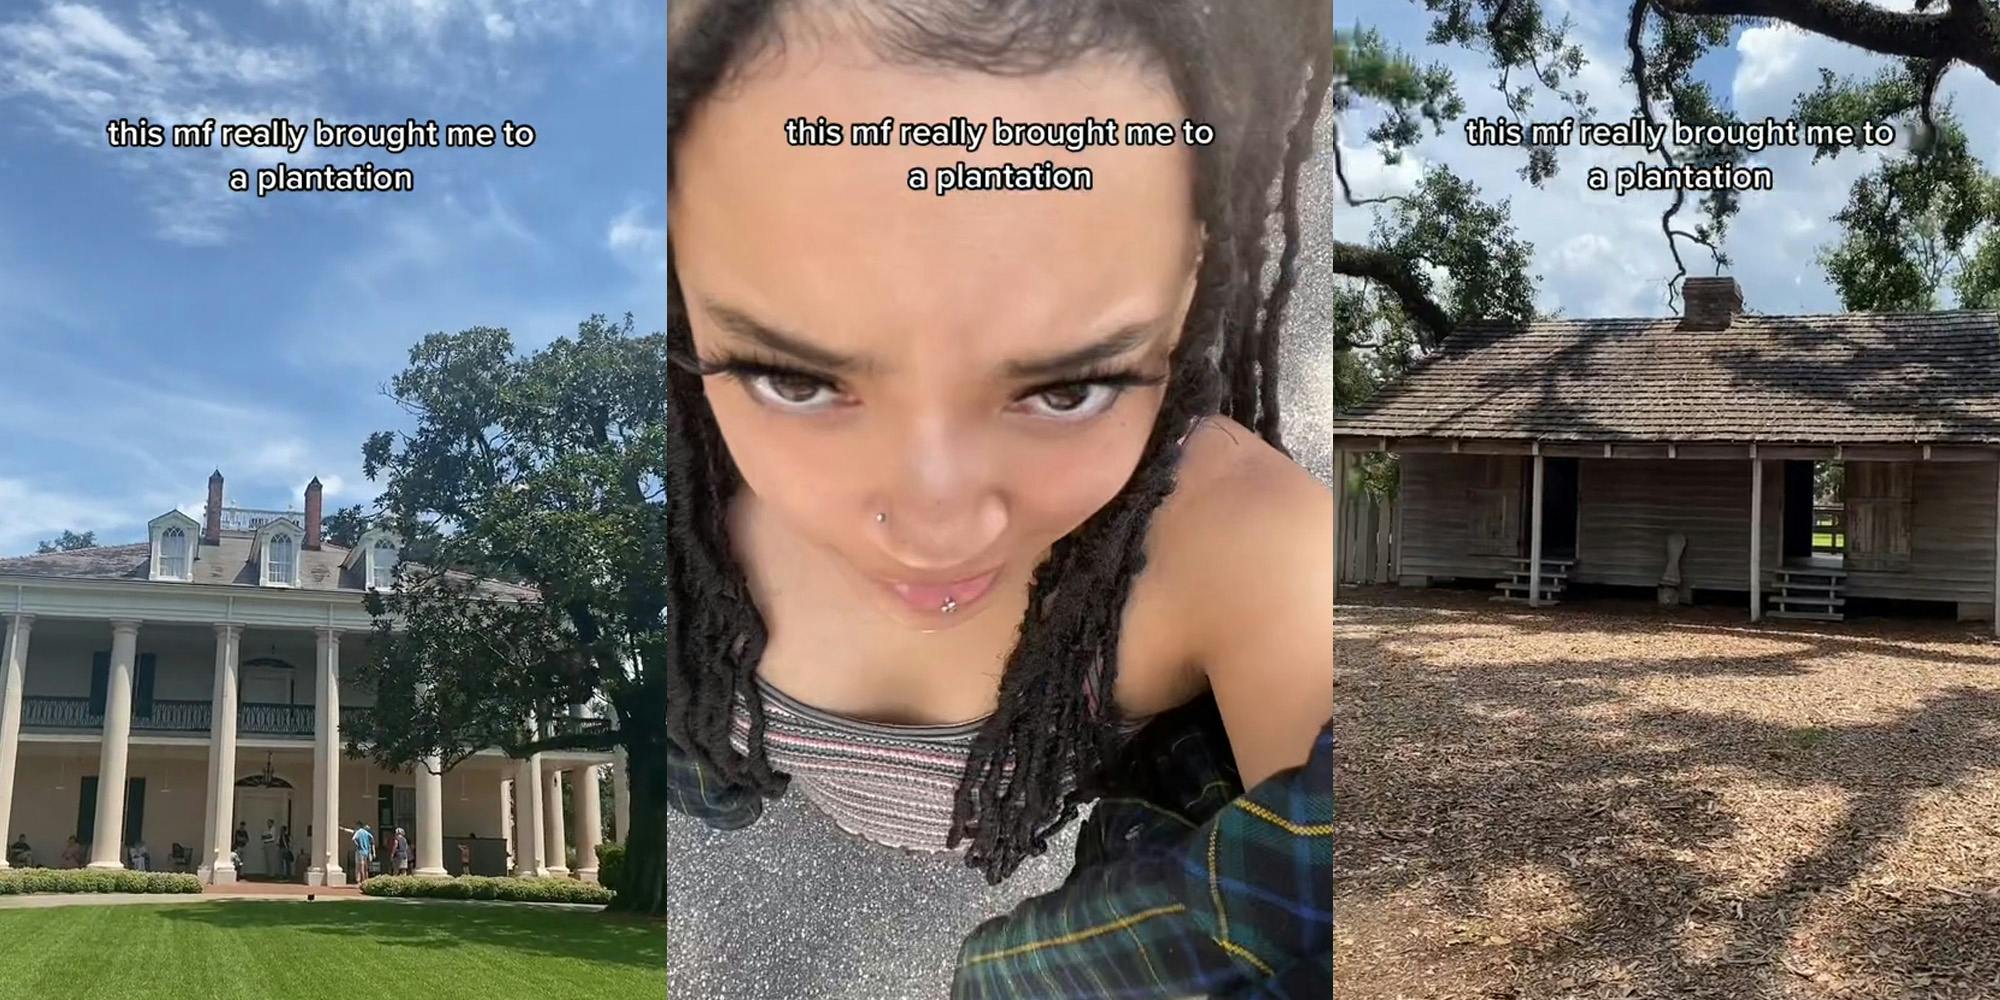 large historical building caption "this mf really brought me to a plantation" (l) woman view from forehead caption "this mf really brought me to a plantation" (c) historical wooden building caption "this mf really brought me to a plantation" (r)